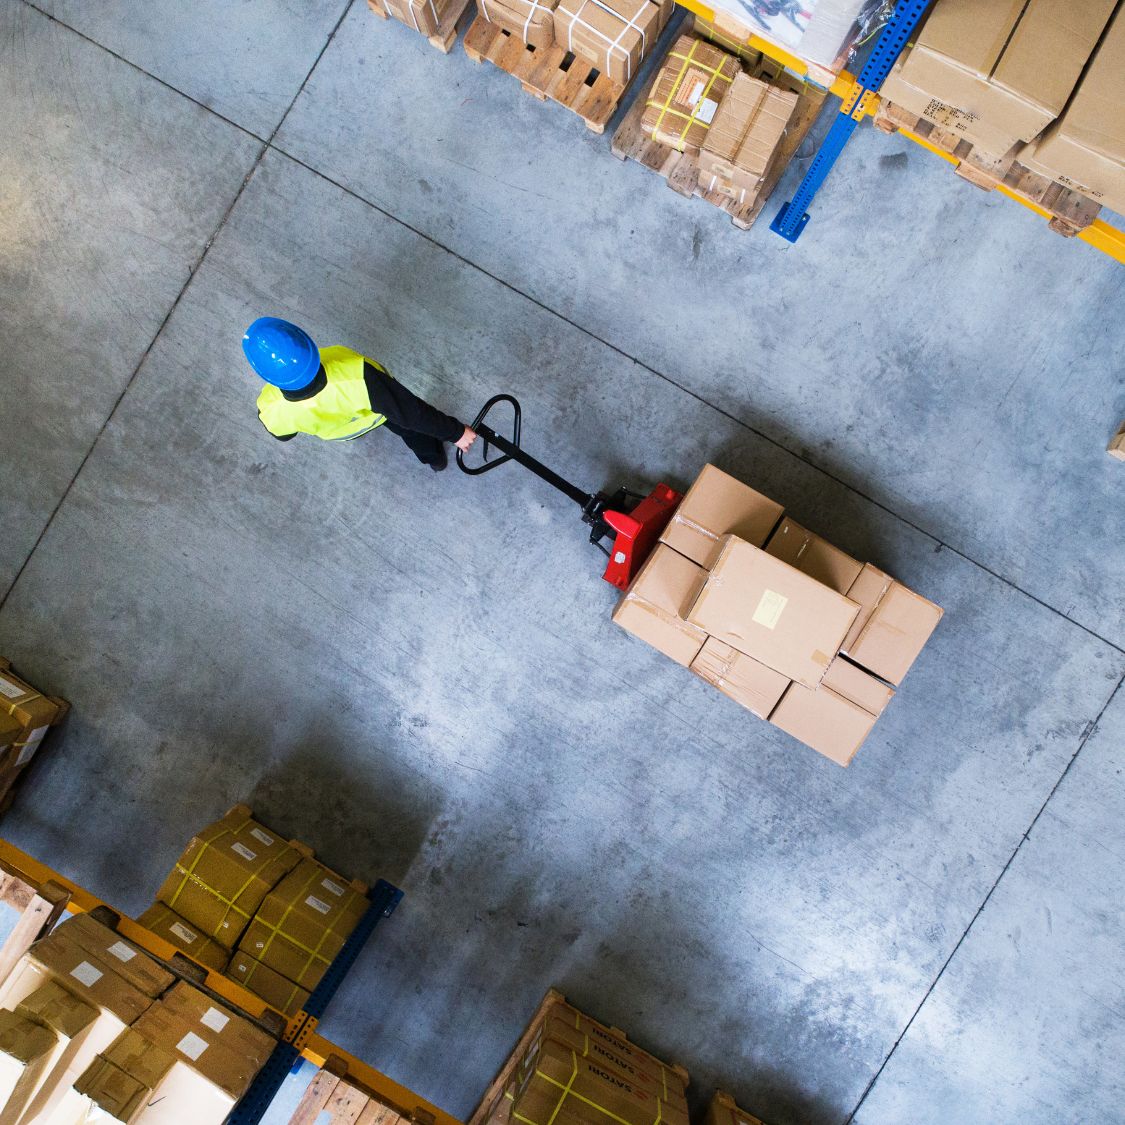 Tips for Preventing an Accident in Your Warehouse